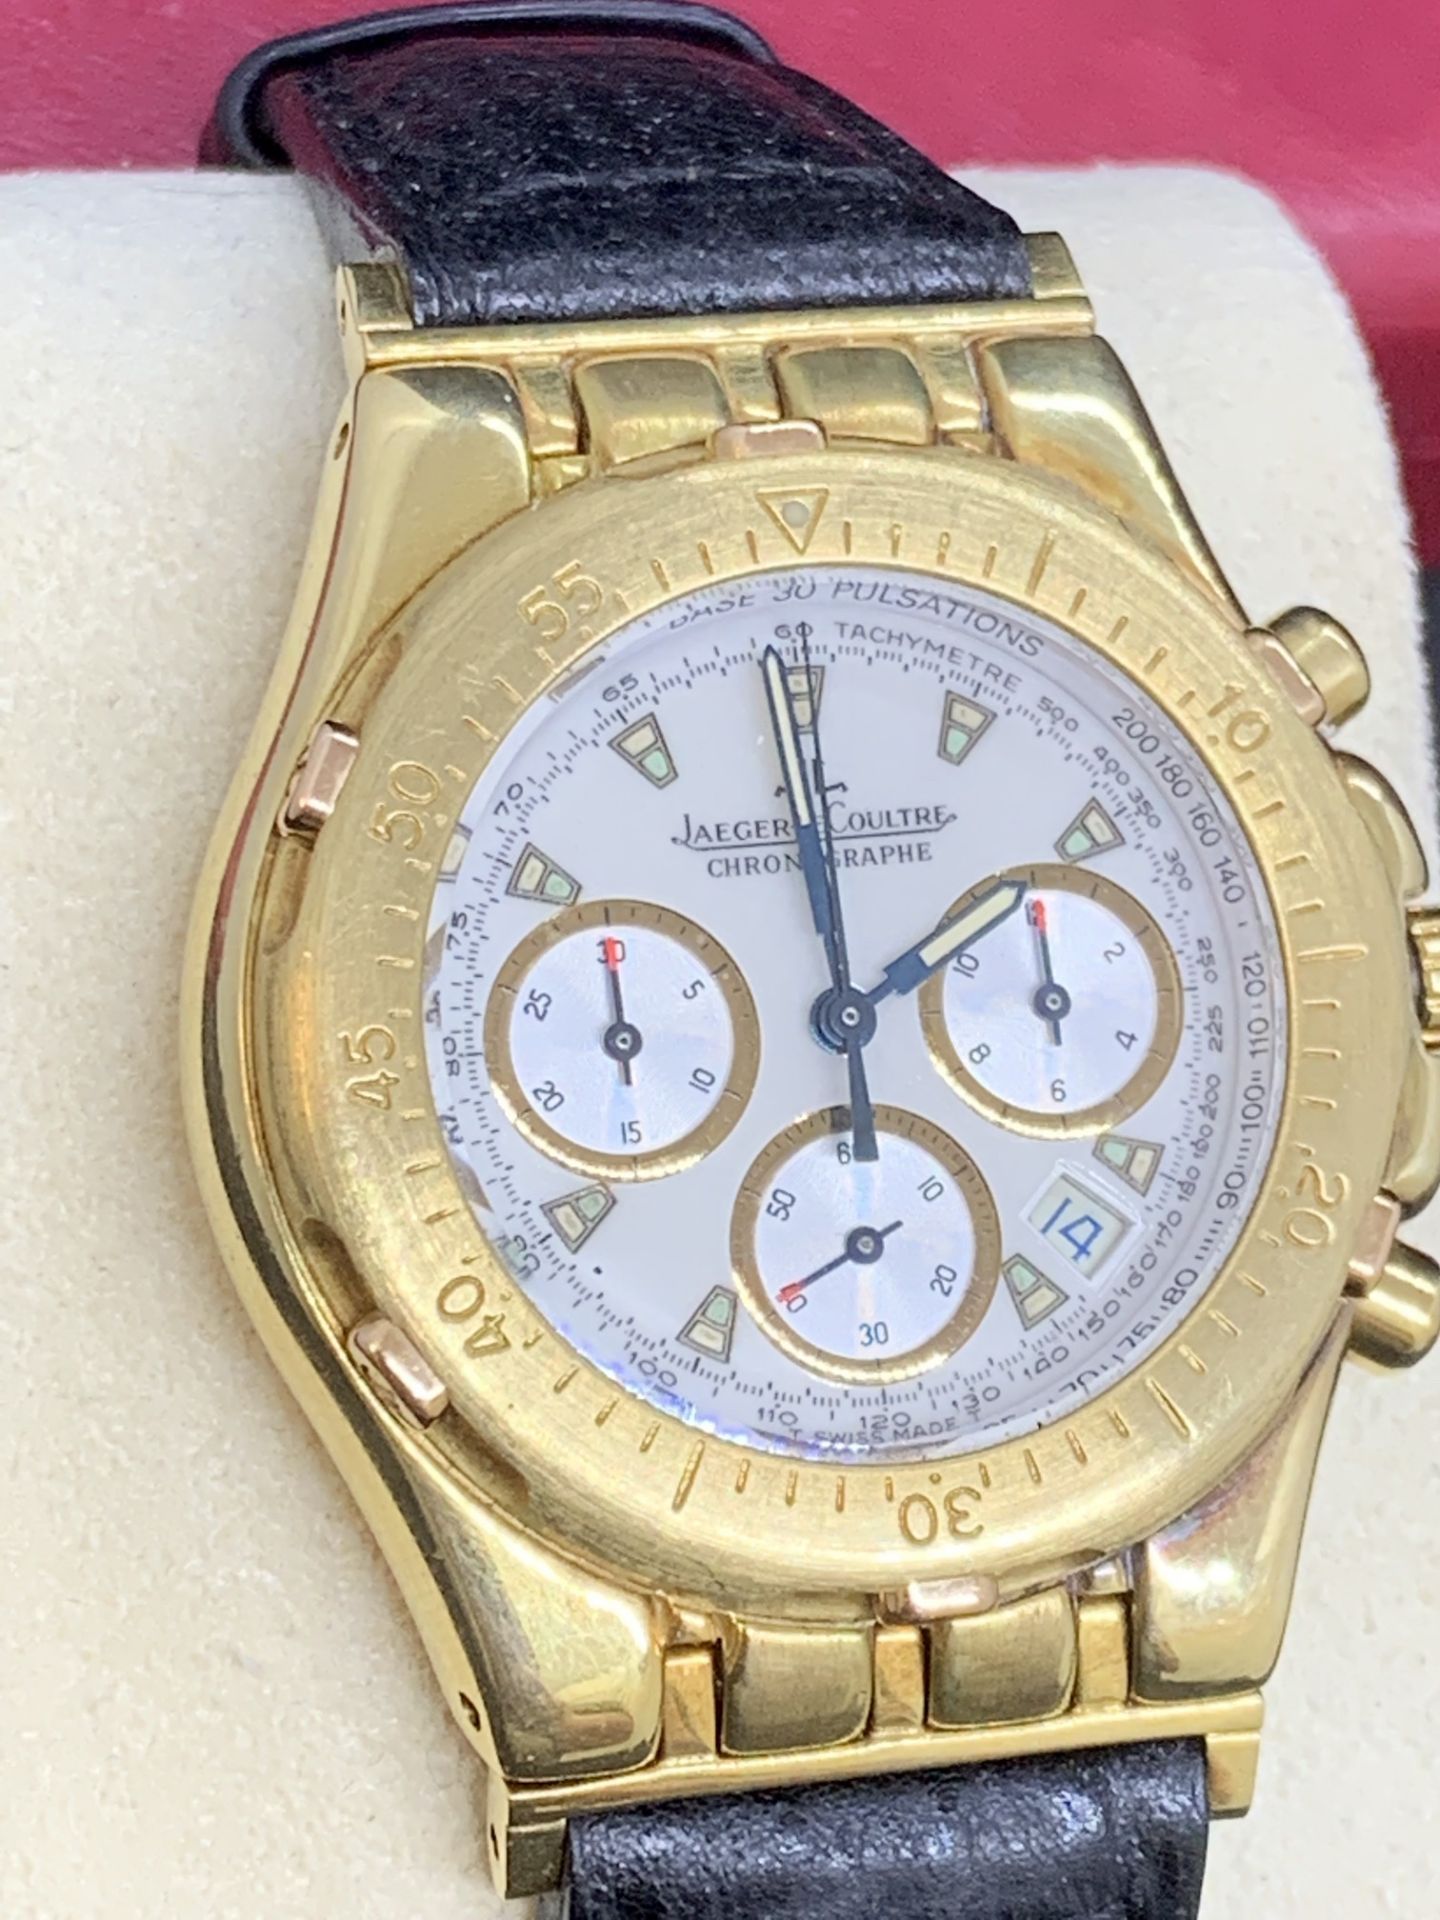 JAEGER LECOULTRE 18ct GOLD CHRONOGRAPH WATCH - Image 5 of 8